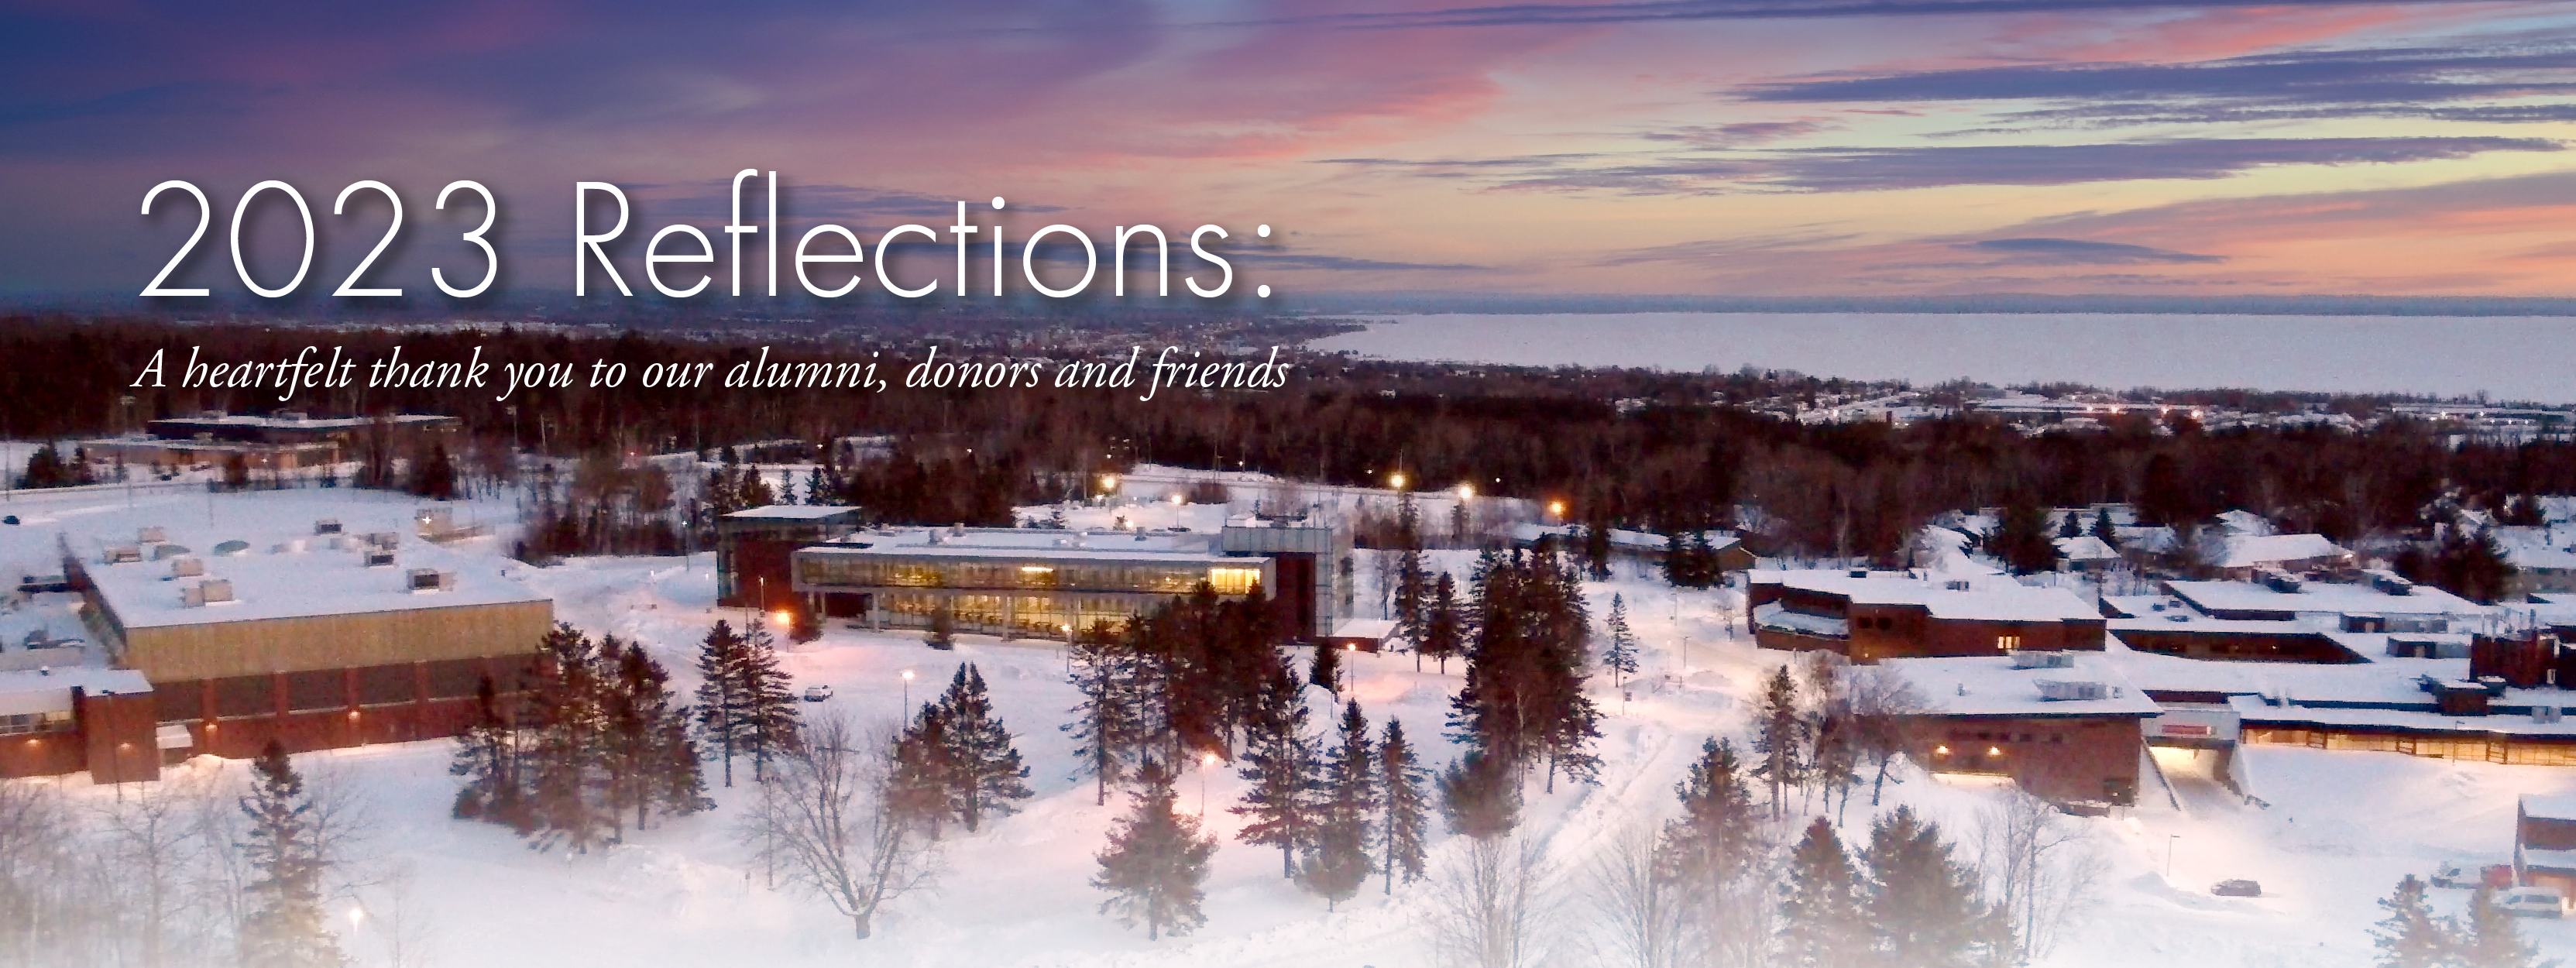 2023 Reflections: A heartfelt thank you to our alumni, donors and friends